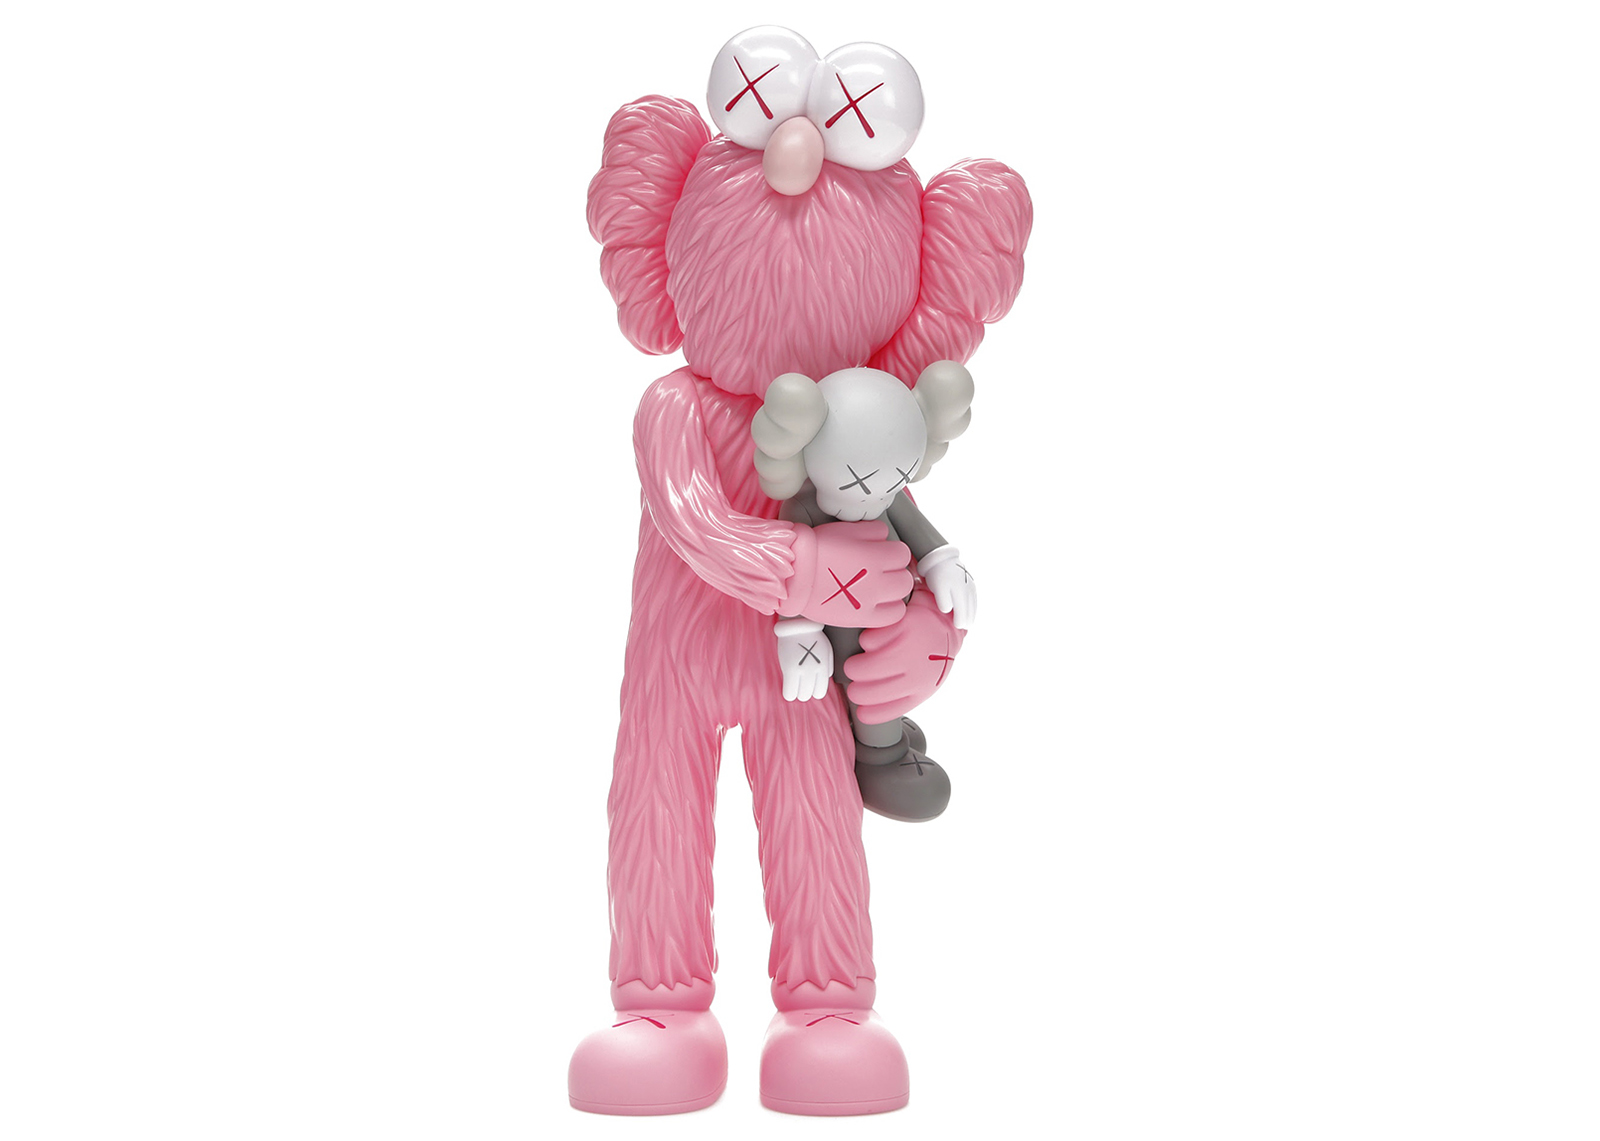 Kaws Gone Open Edition 2019 ピンク　カウズフィギュア